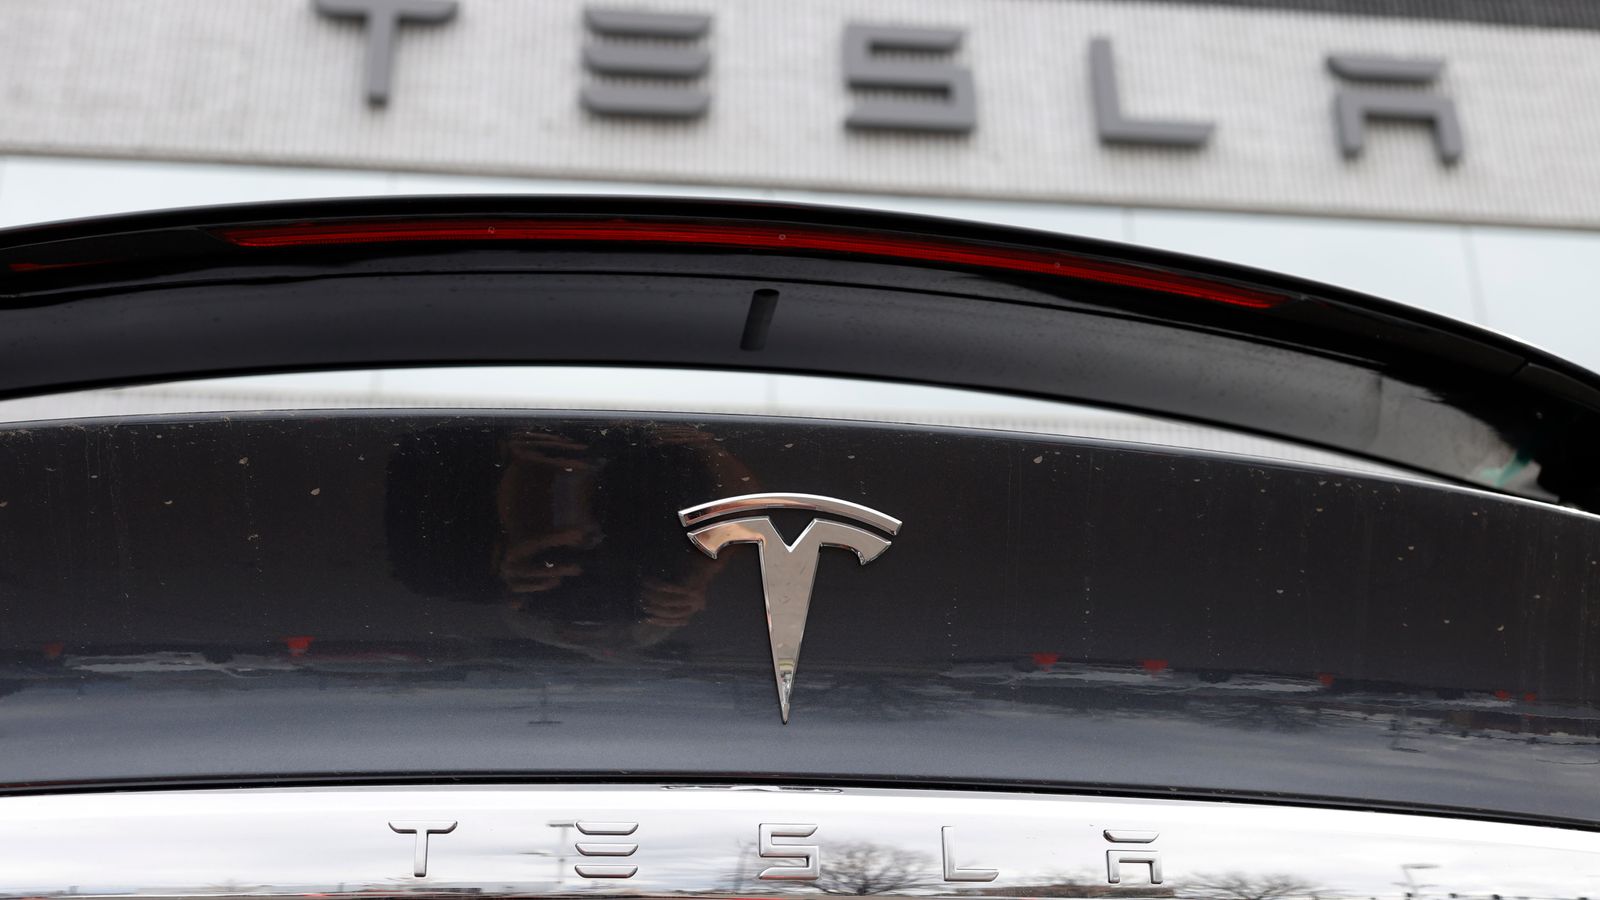 Tesla recalls more than 300,000 vehicles in US over rear light problems